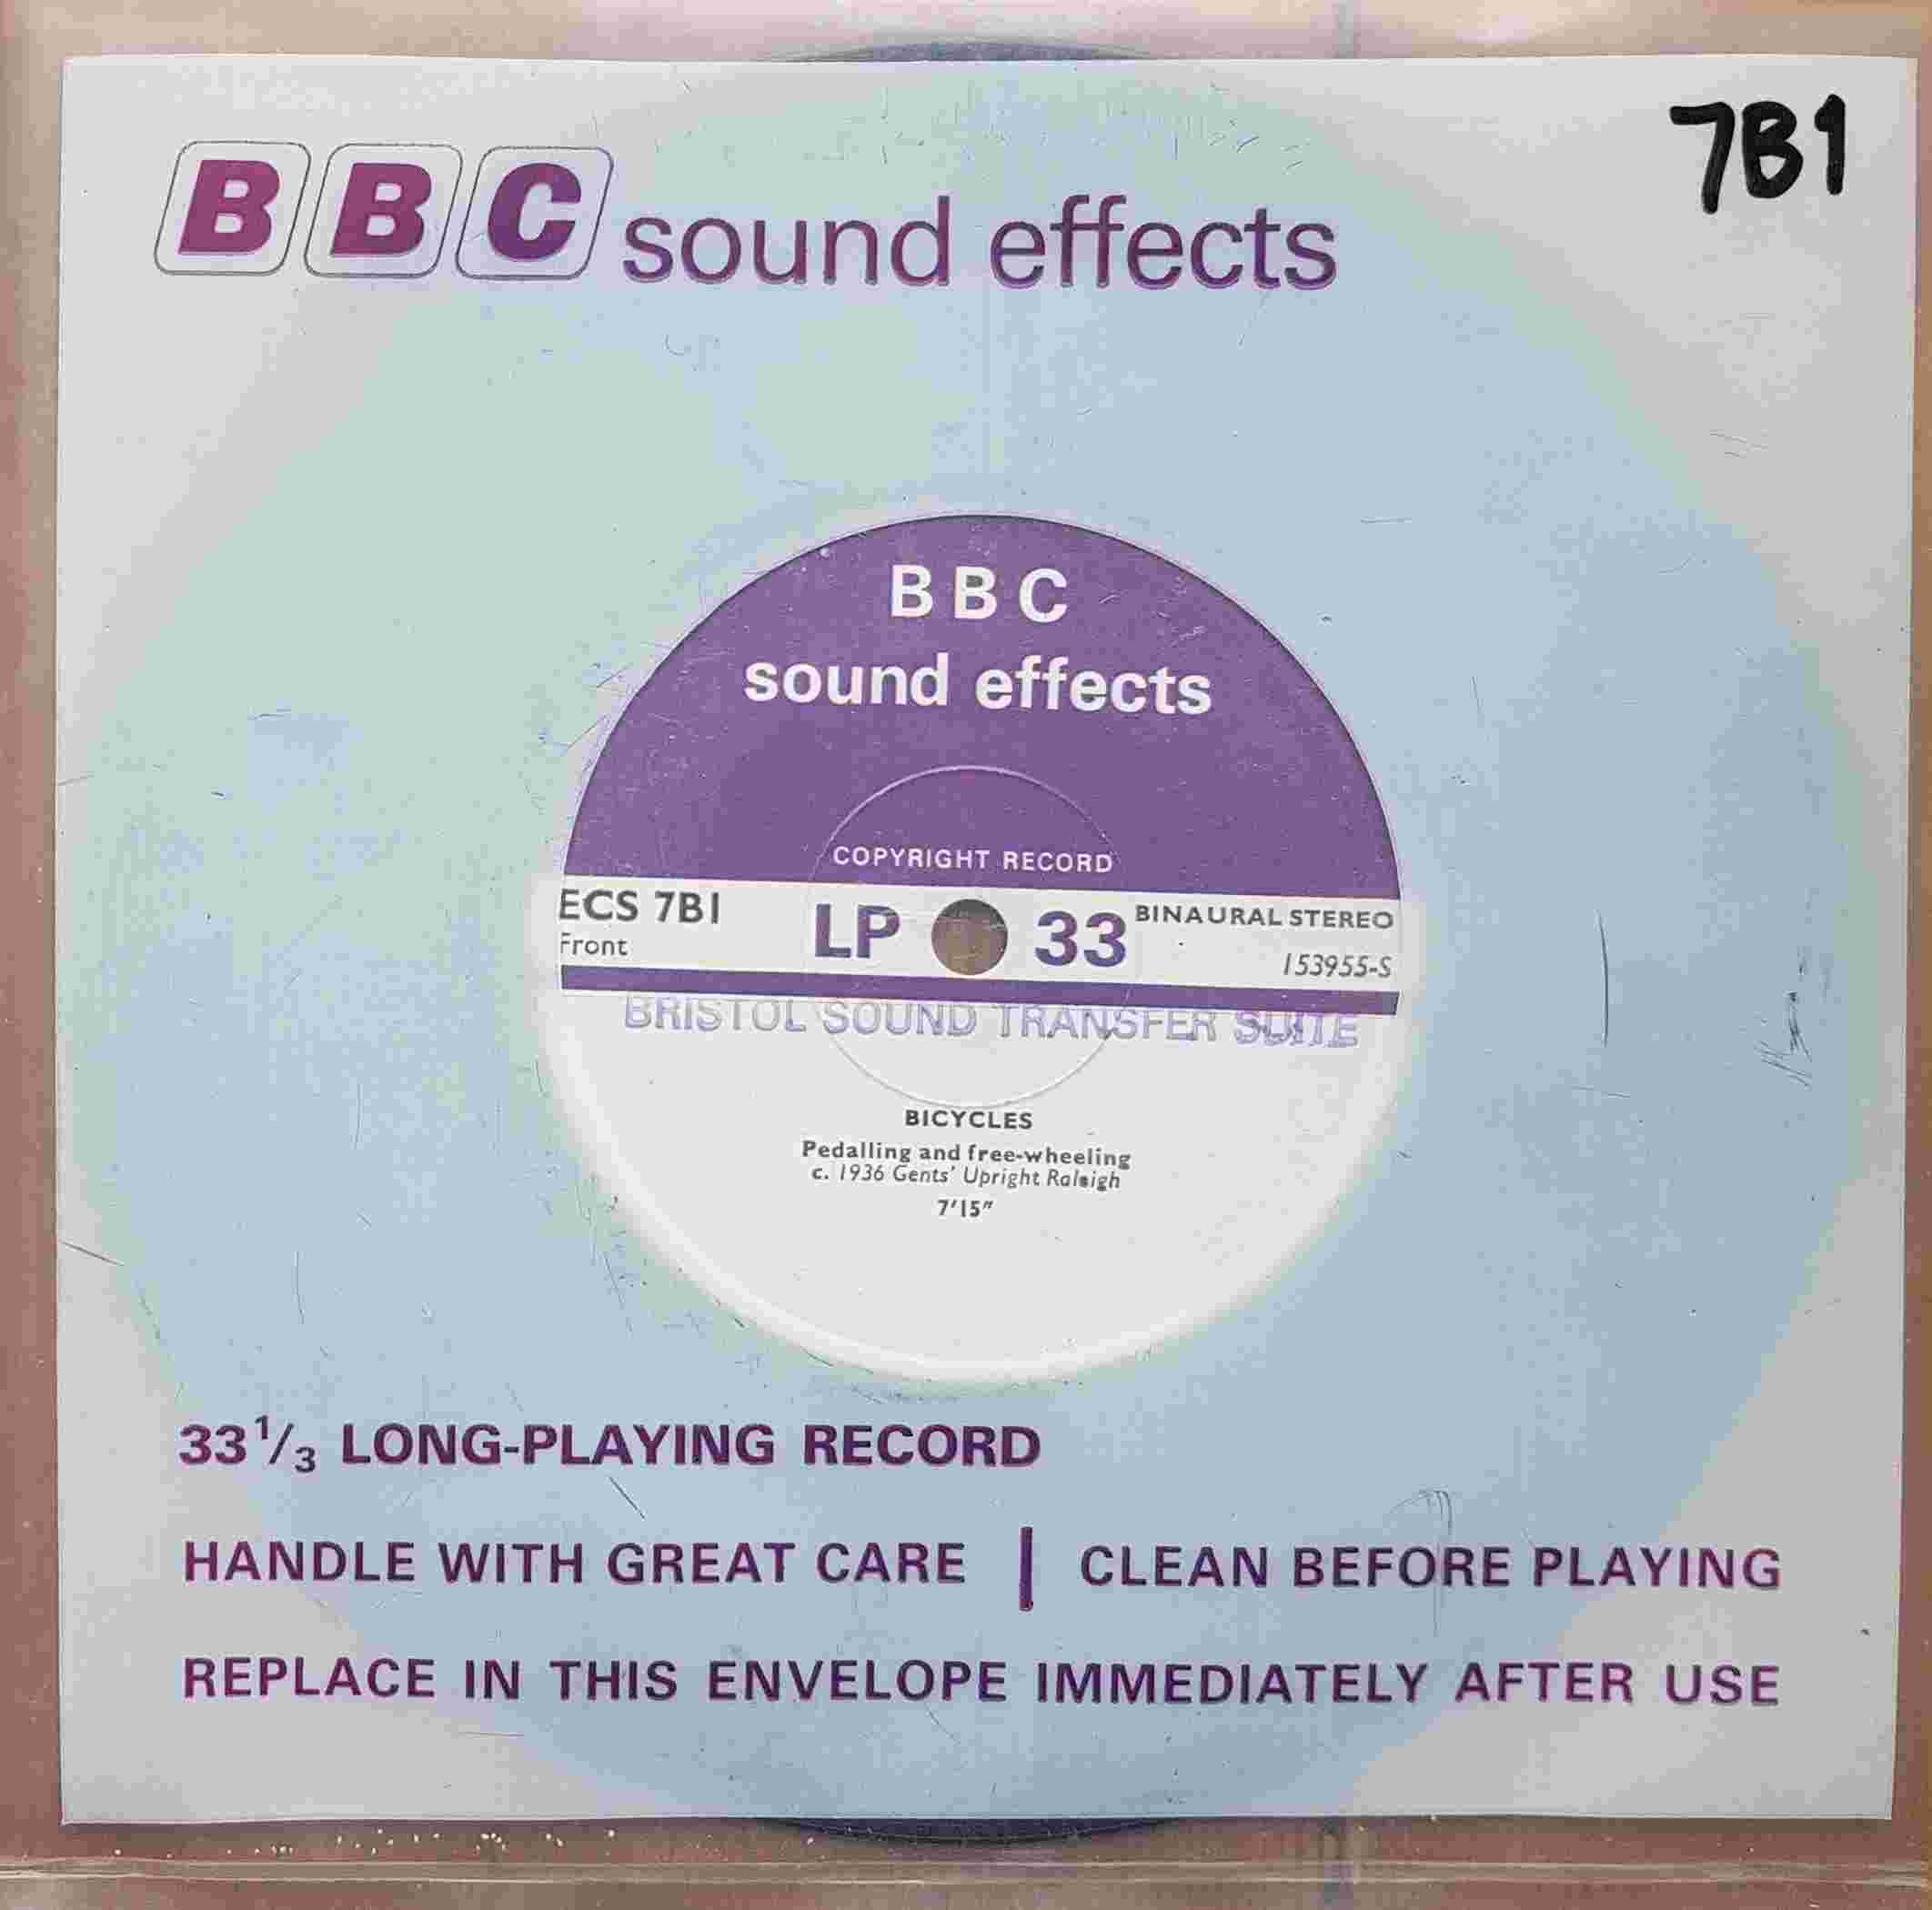 Picture of ECS 7B1 Bicycles by artist Not registered from the BBC records and Tapes library